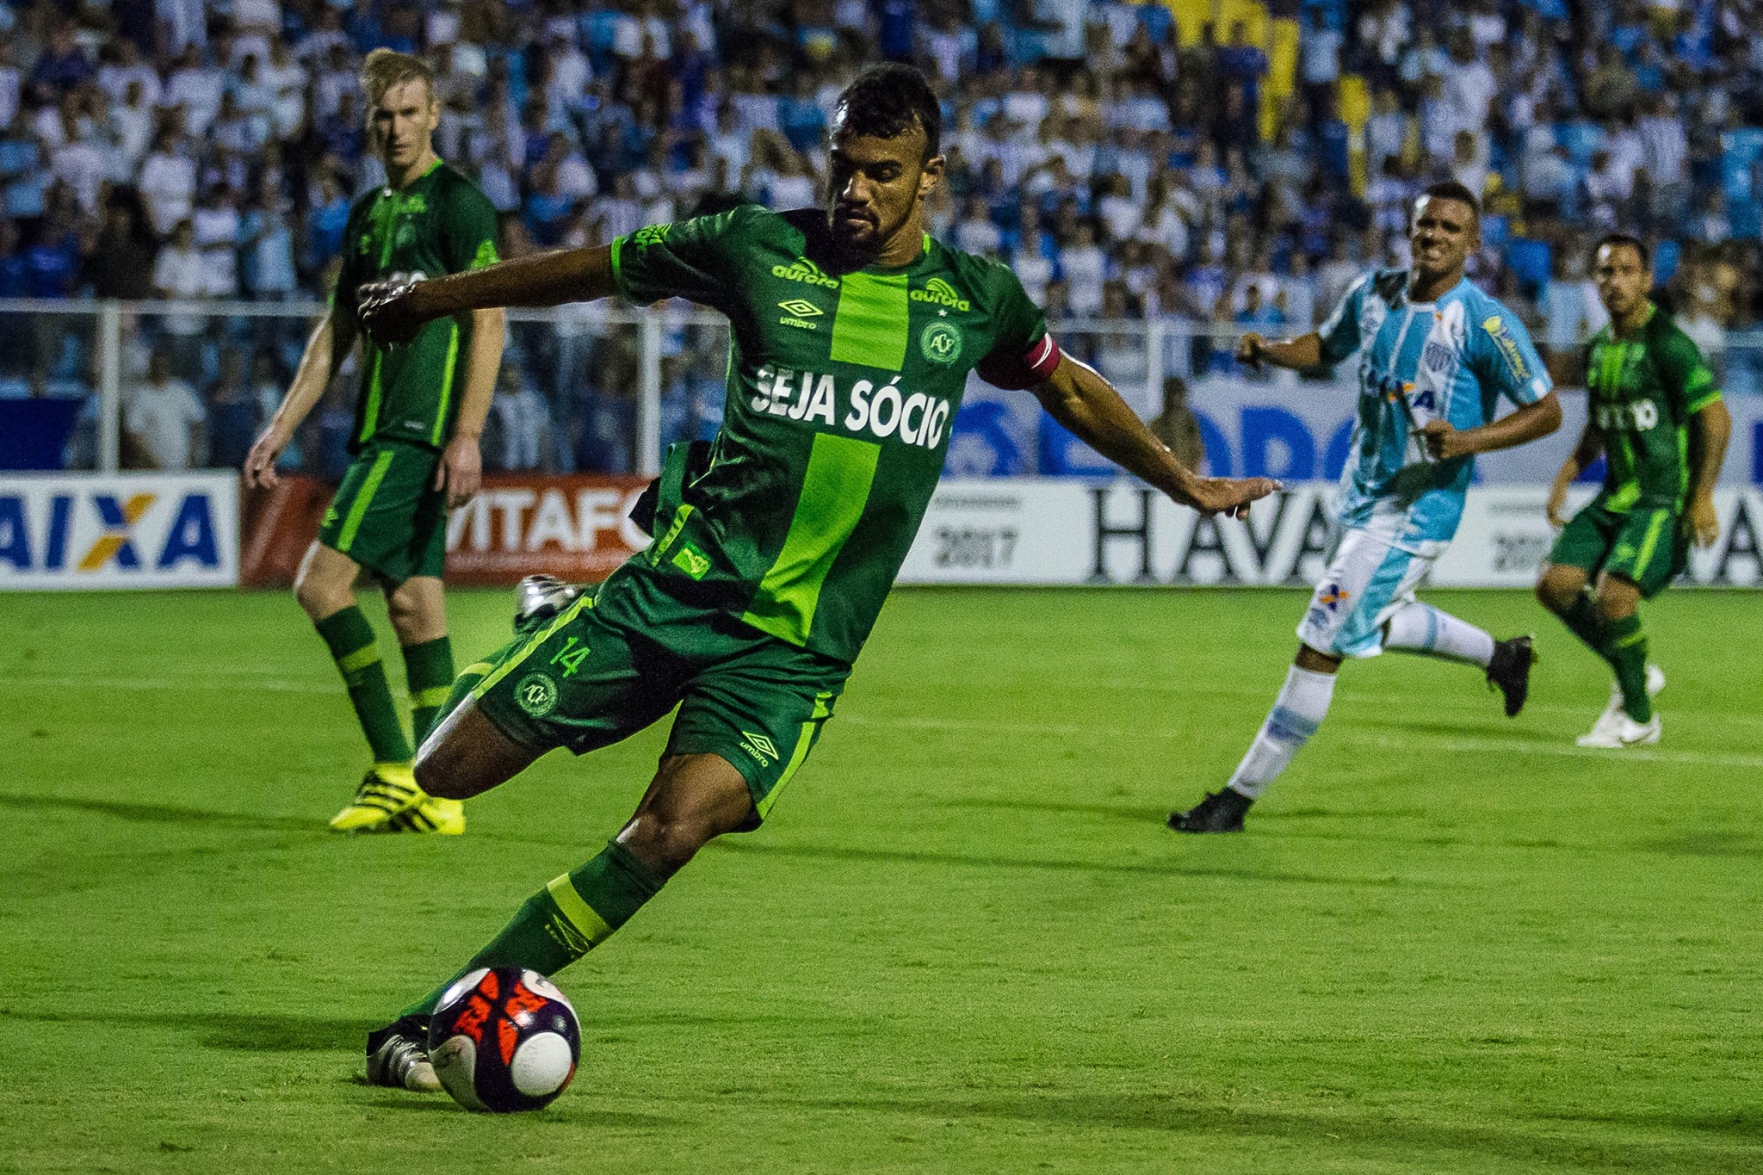 Chapecoense Move To Top Of Brazil's Serie A